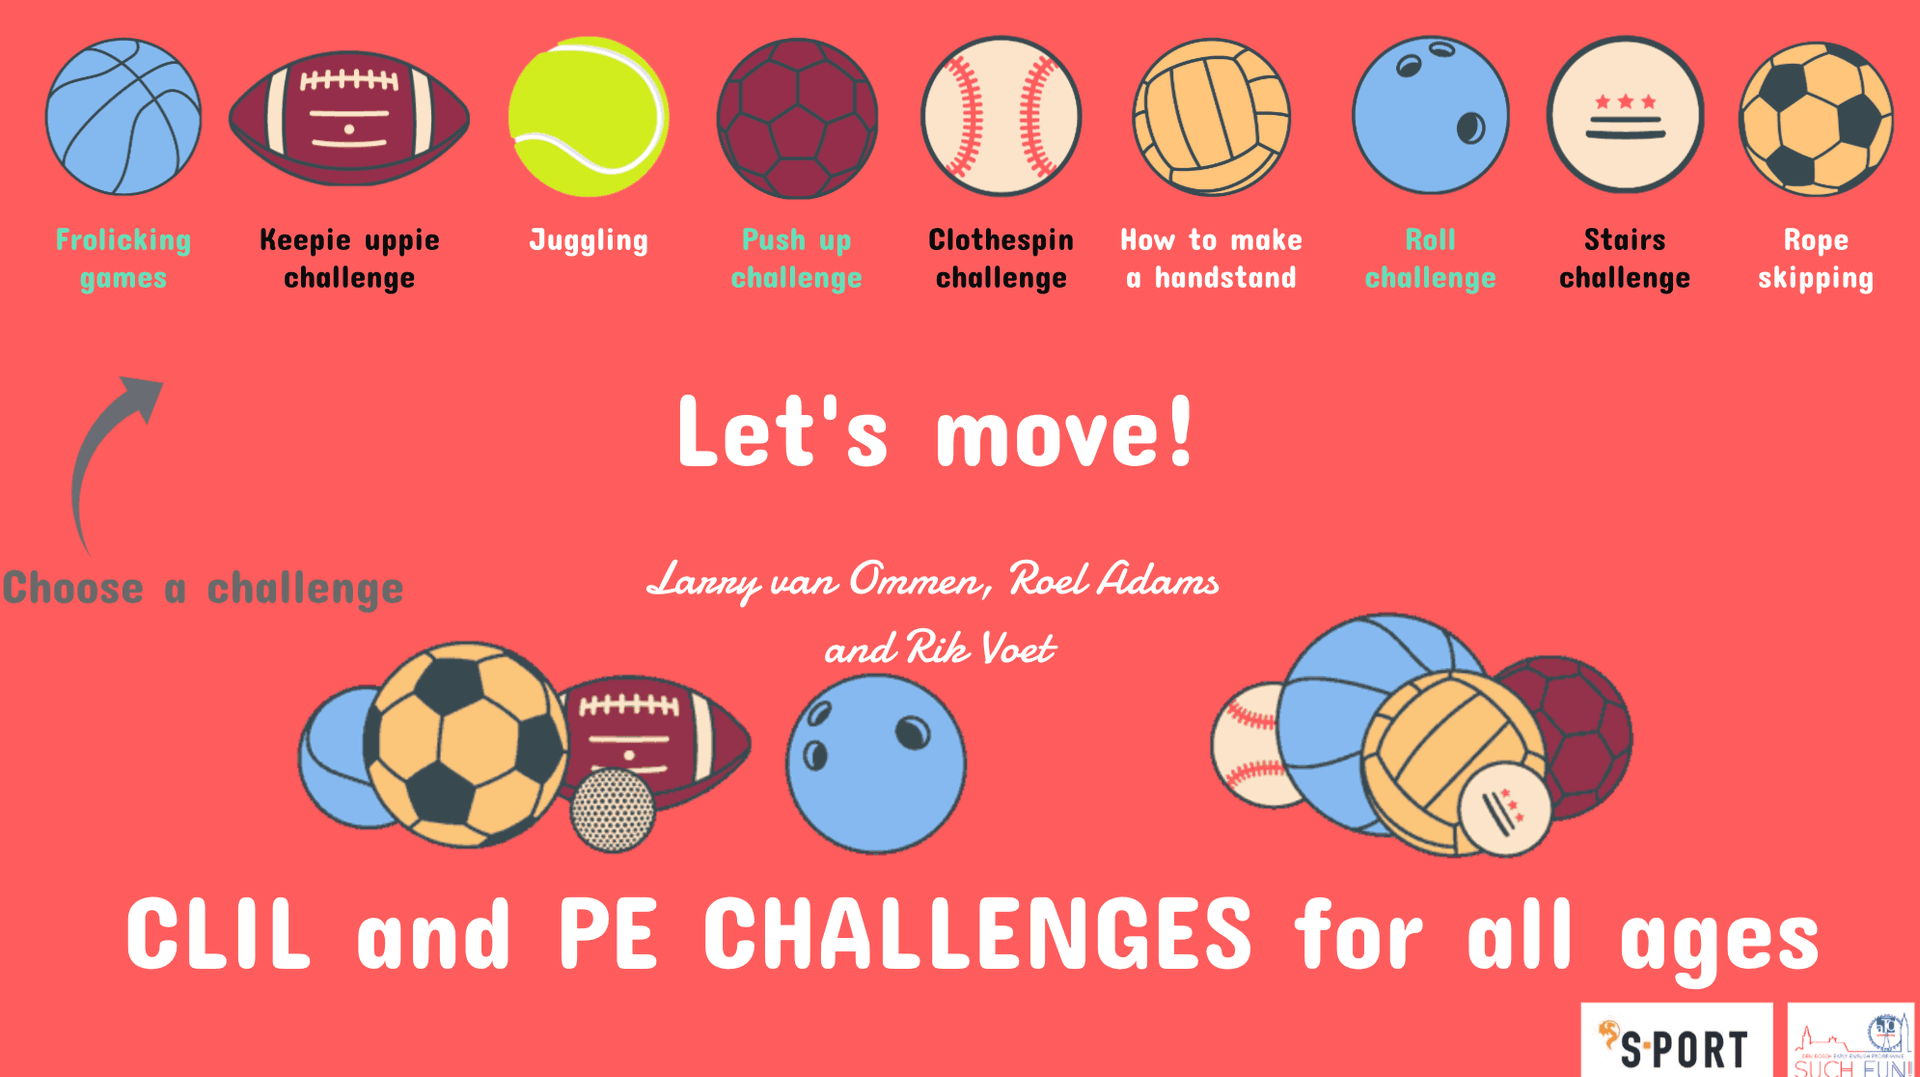 CLIL and PE challenges for all ages